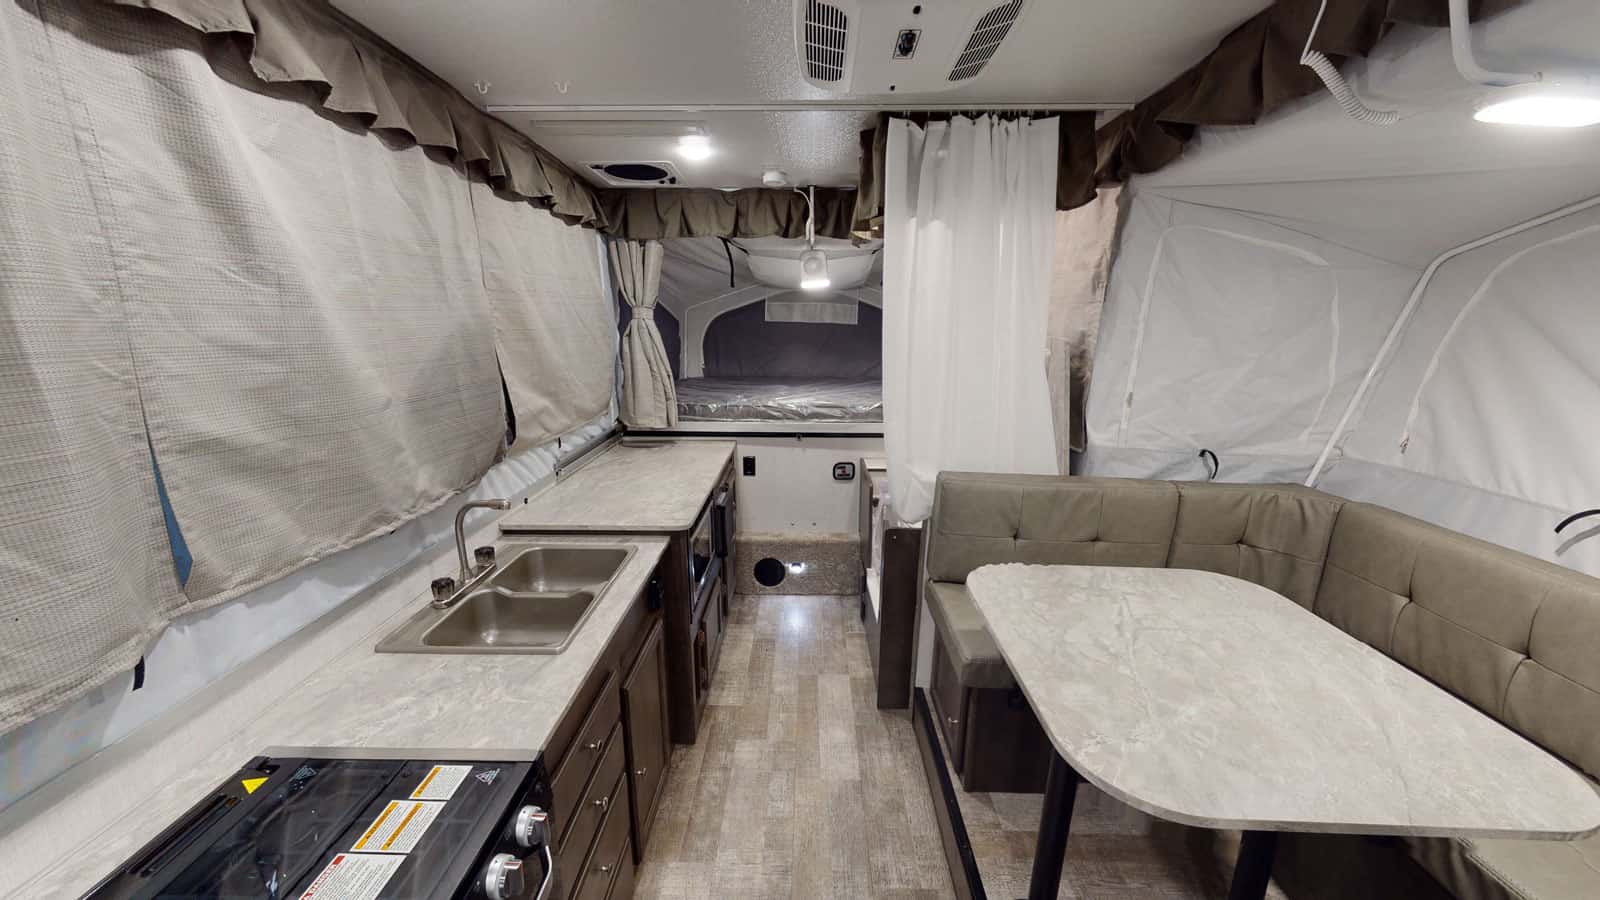 Interior view of the RV kitchen in the Rockwood Tent HW277